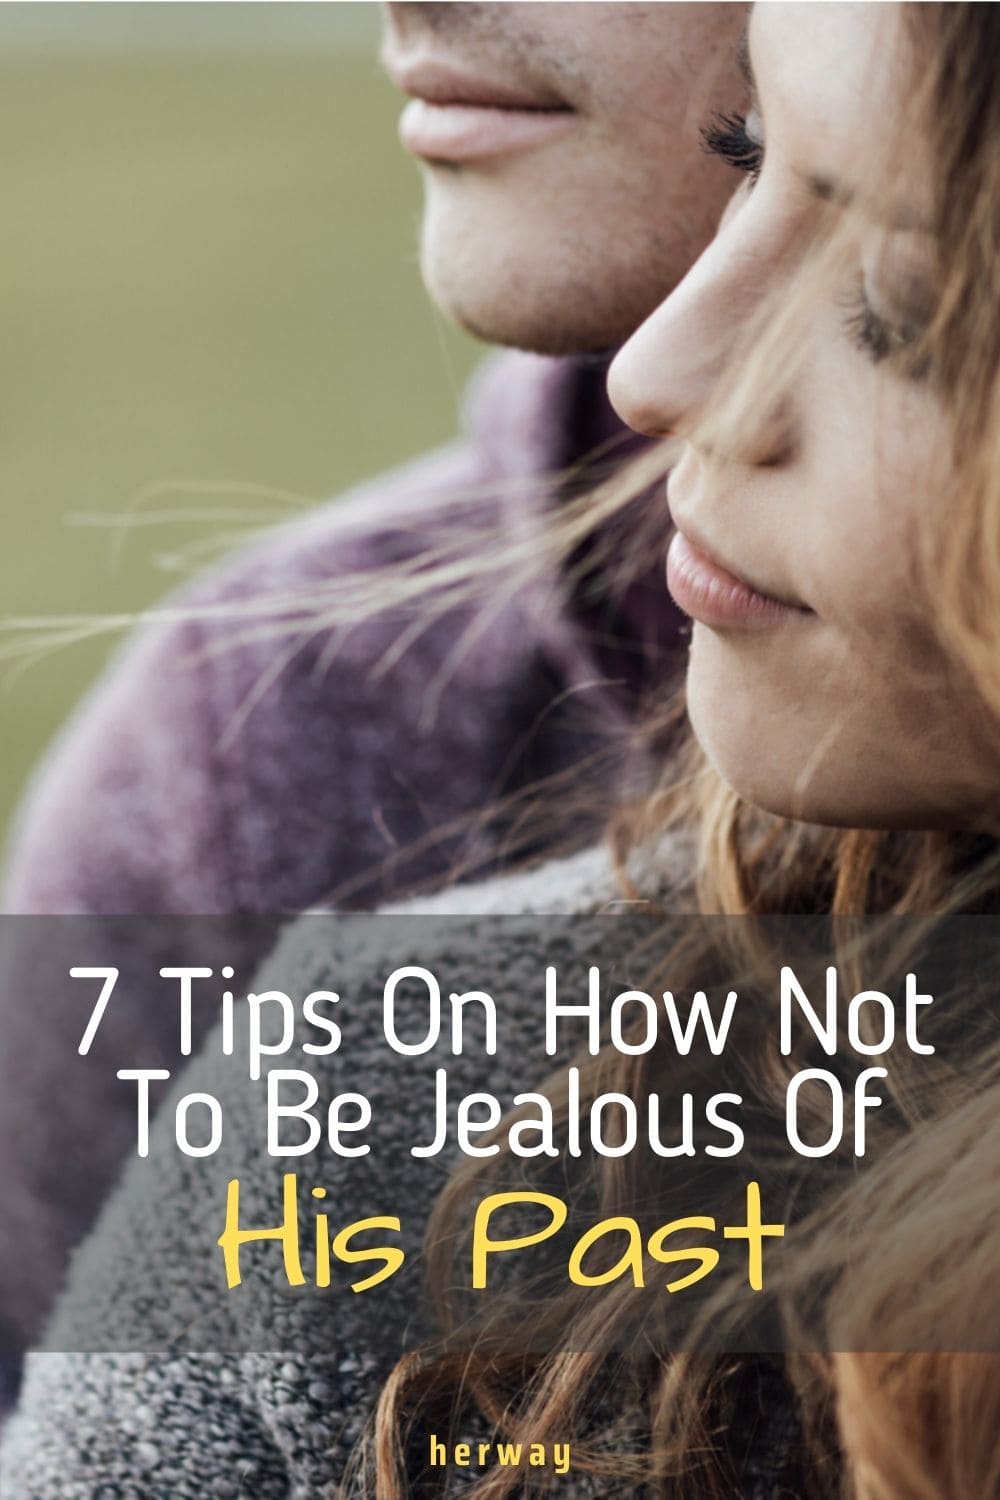 7 Tips On How Not To Be Jealous Of His Past